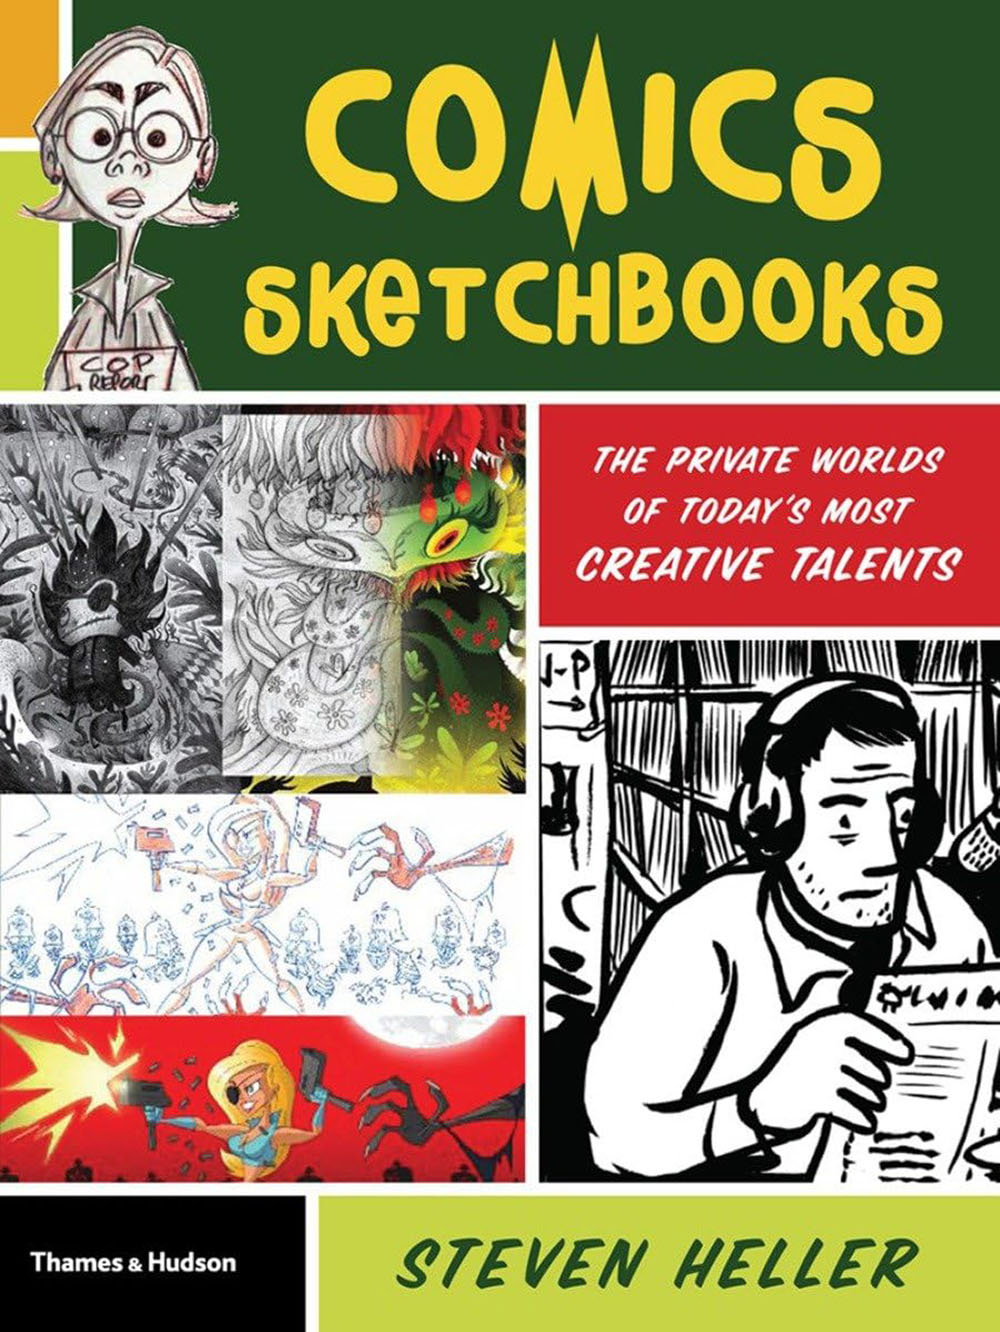 Comics Sketchbooks: The Private Worlds of Today's Most Creative Talents at The Book Palace